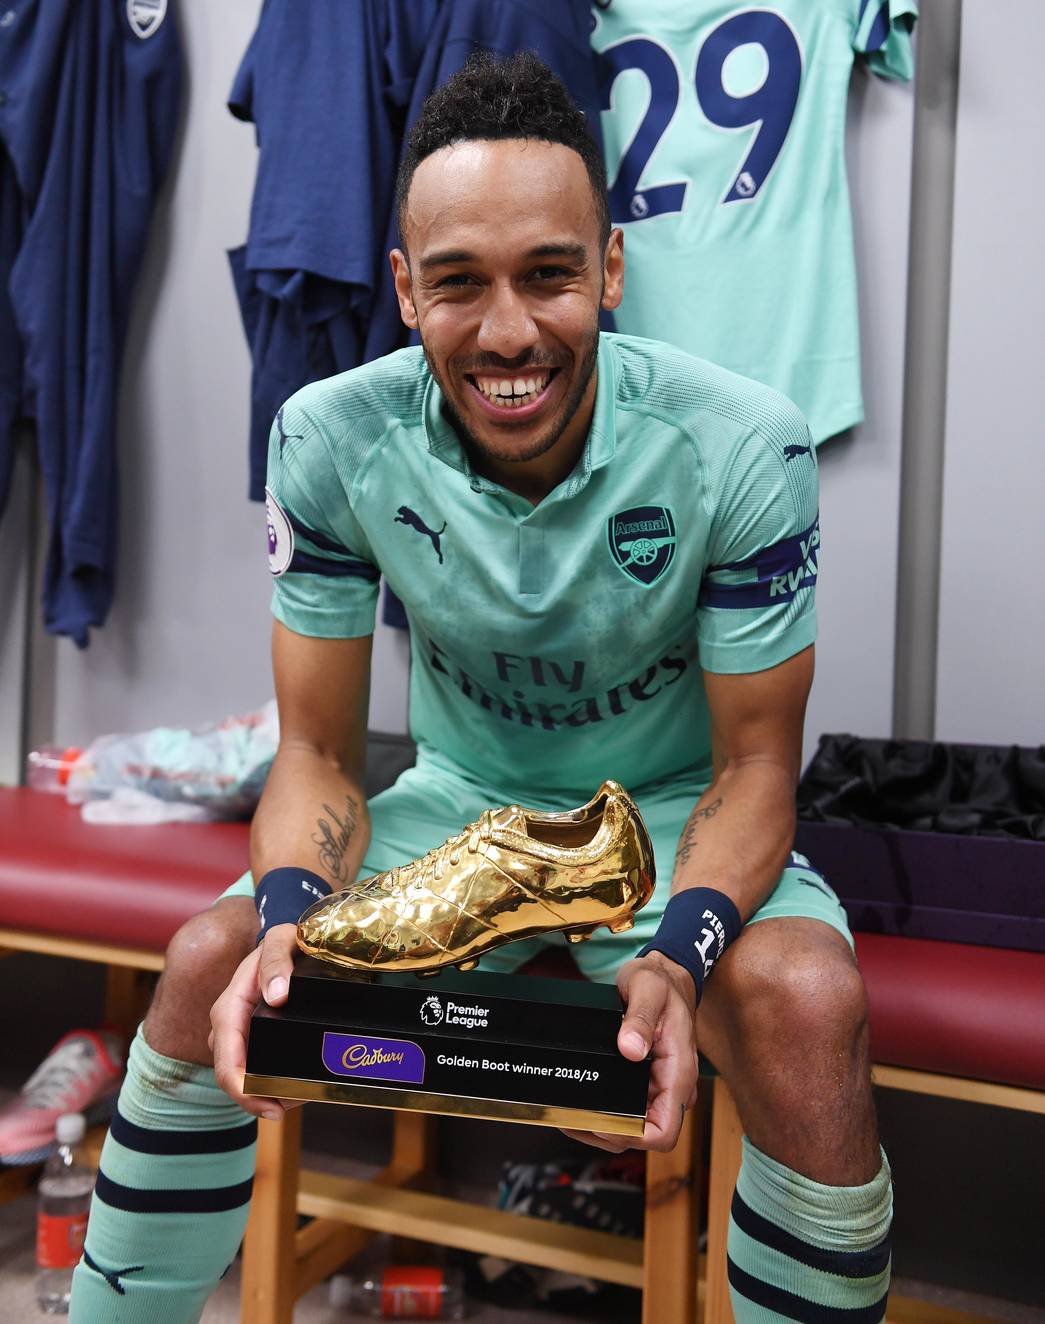 Picture: Auba poses with Golden Boot